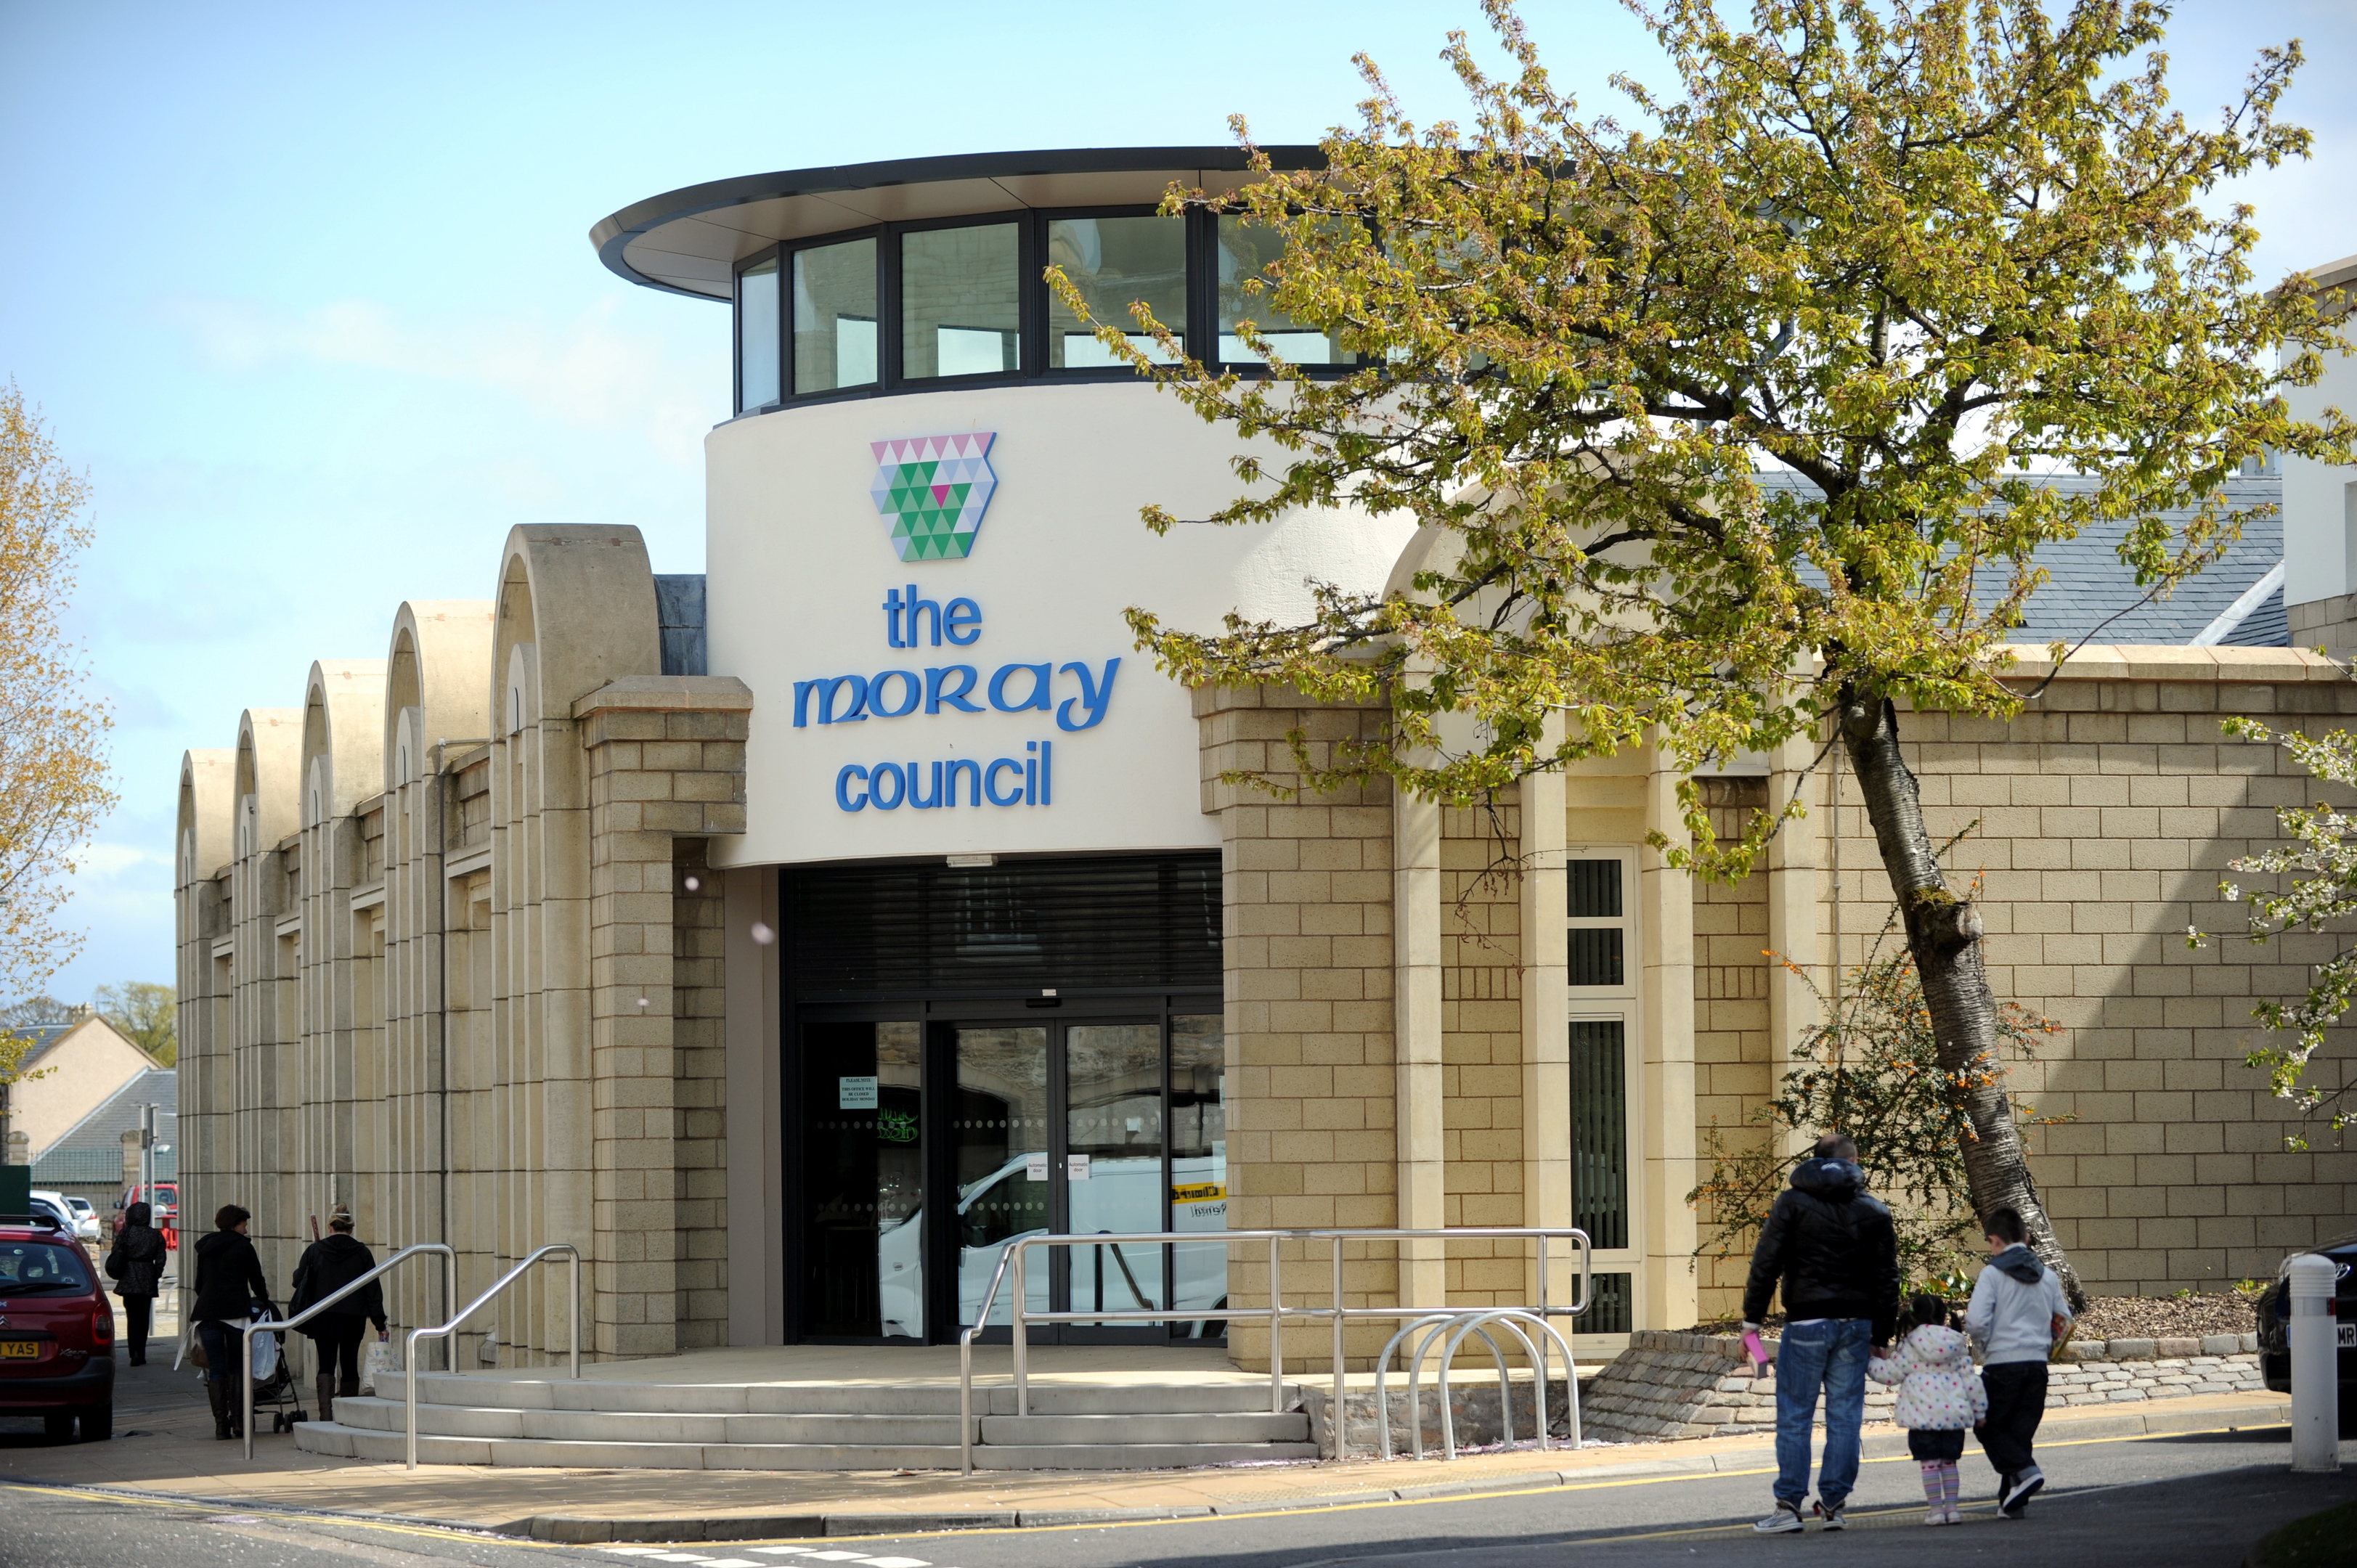 The Moray Council headquarters in Elgin.